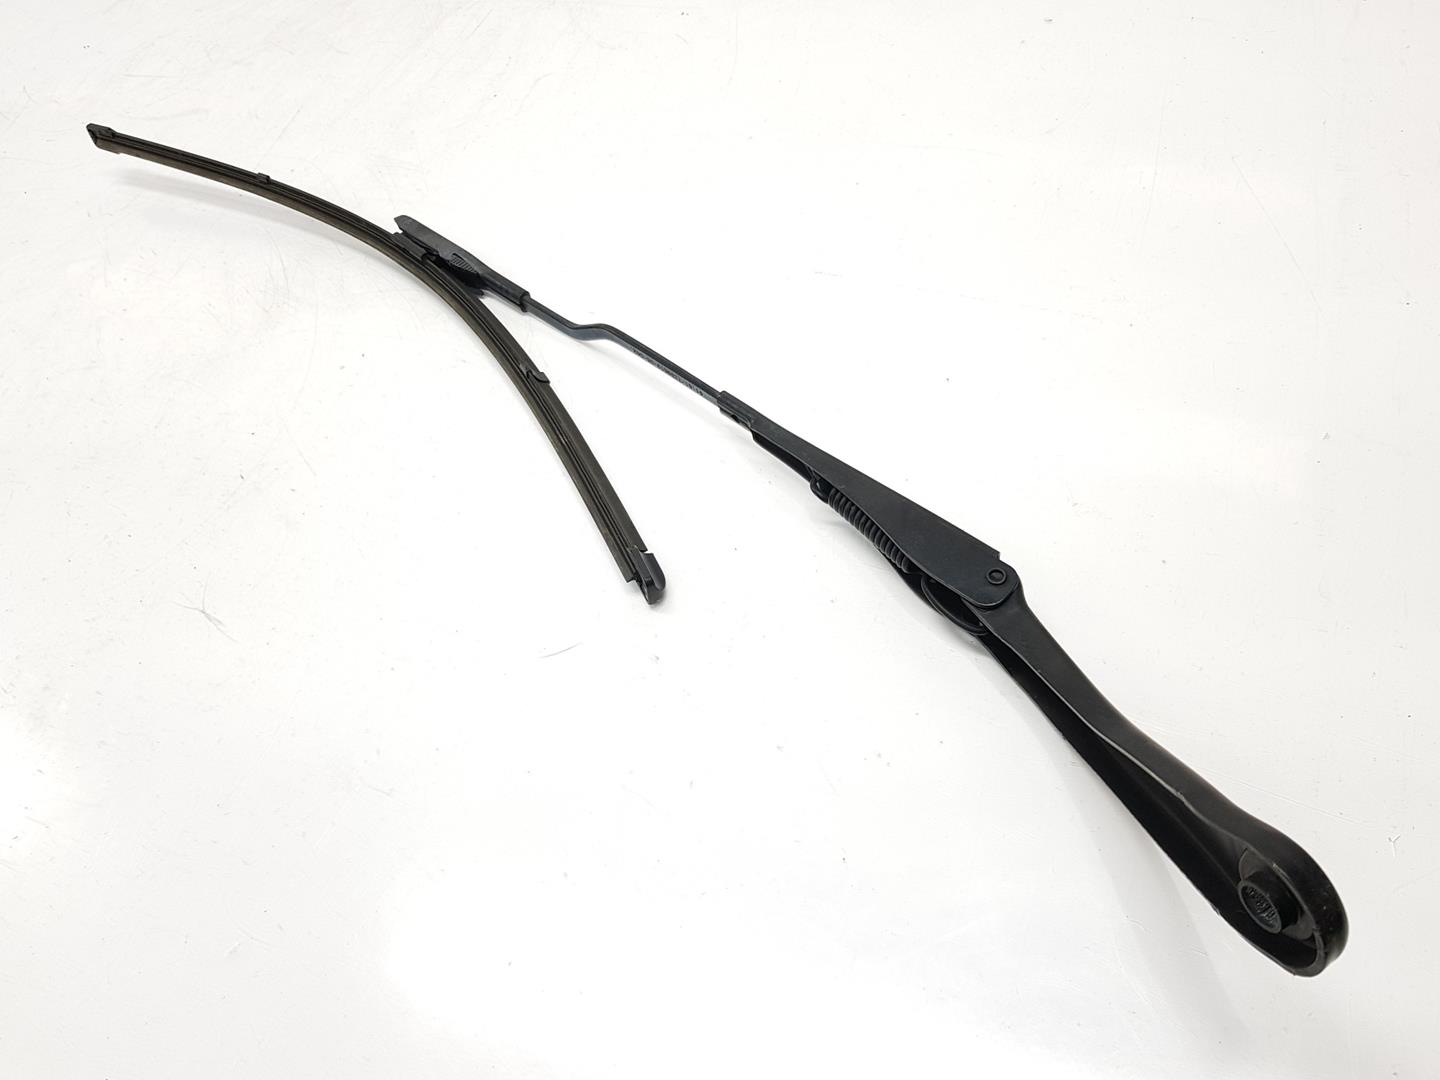 BMW 1 Series F20/F21 (2011-2020) Front Wiper Arms 61617239519, 61619465042 23750707